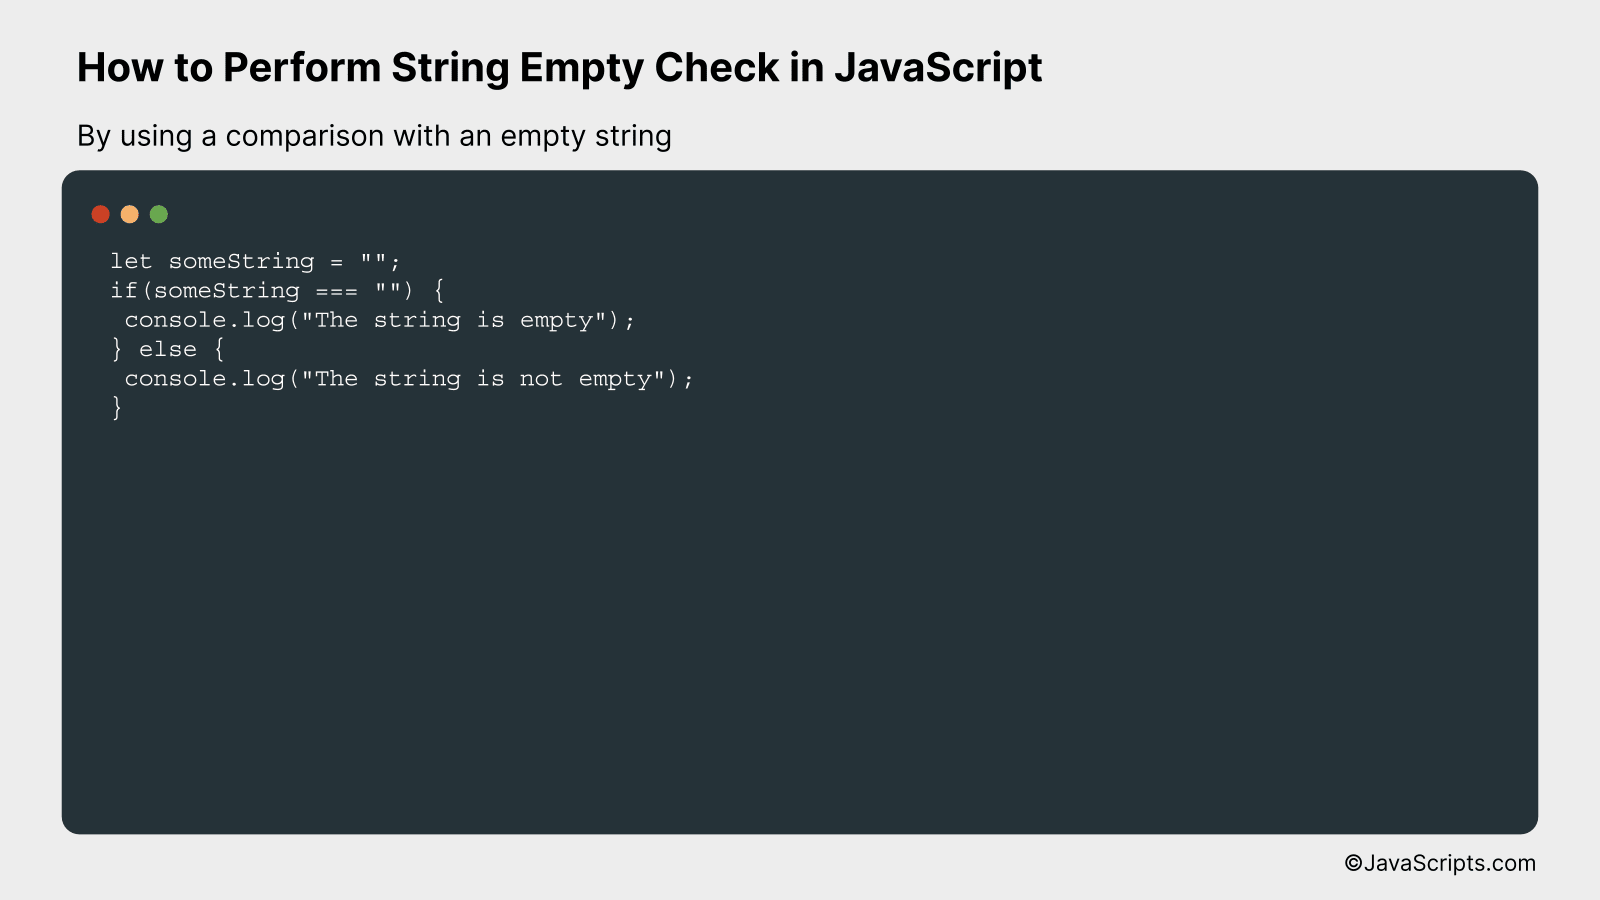 By using a comparison with an empty string